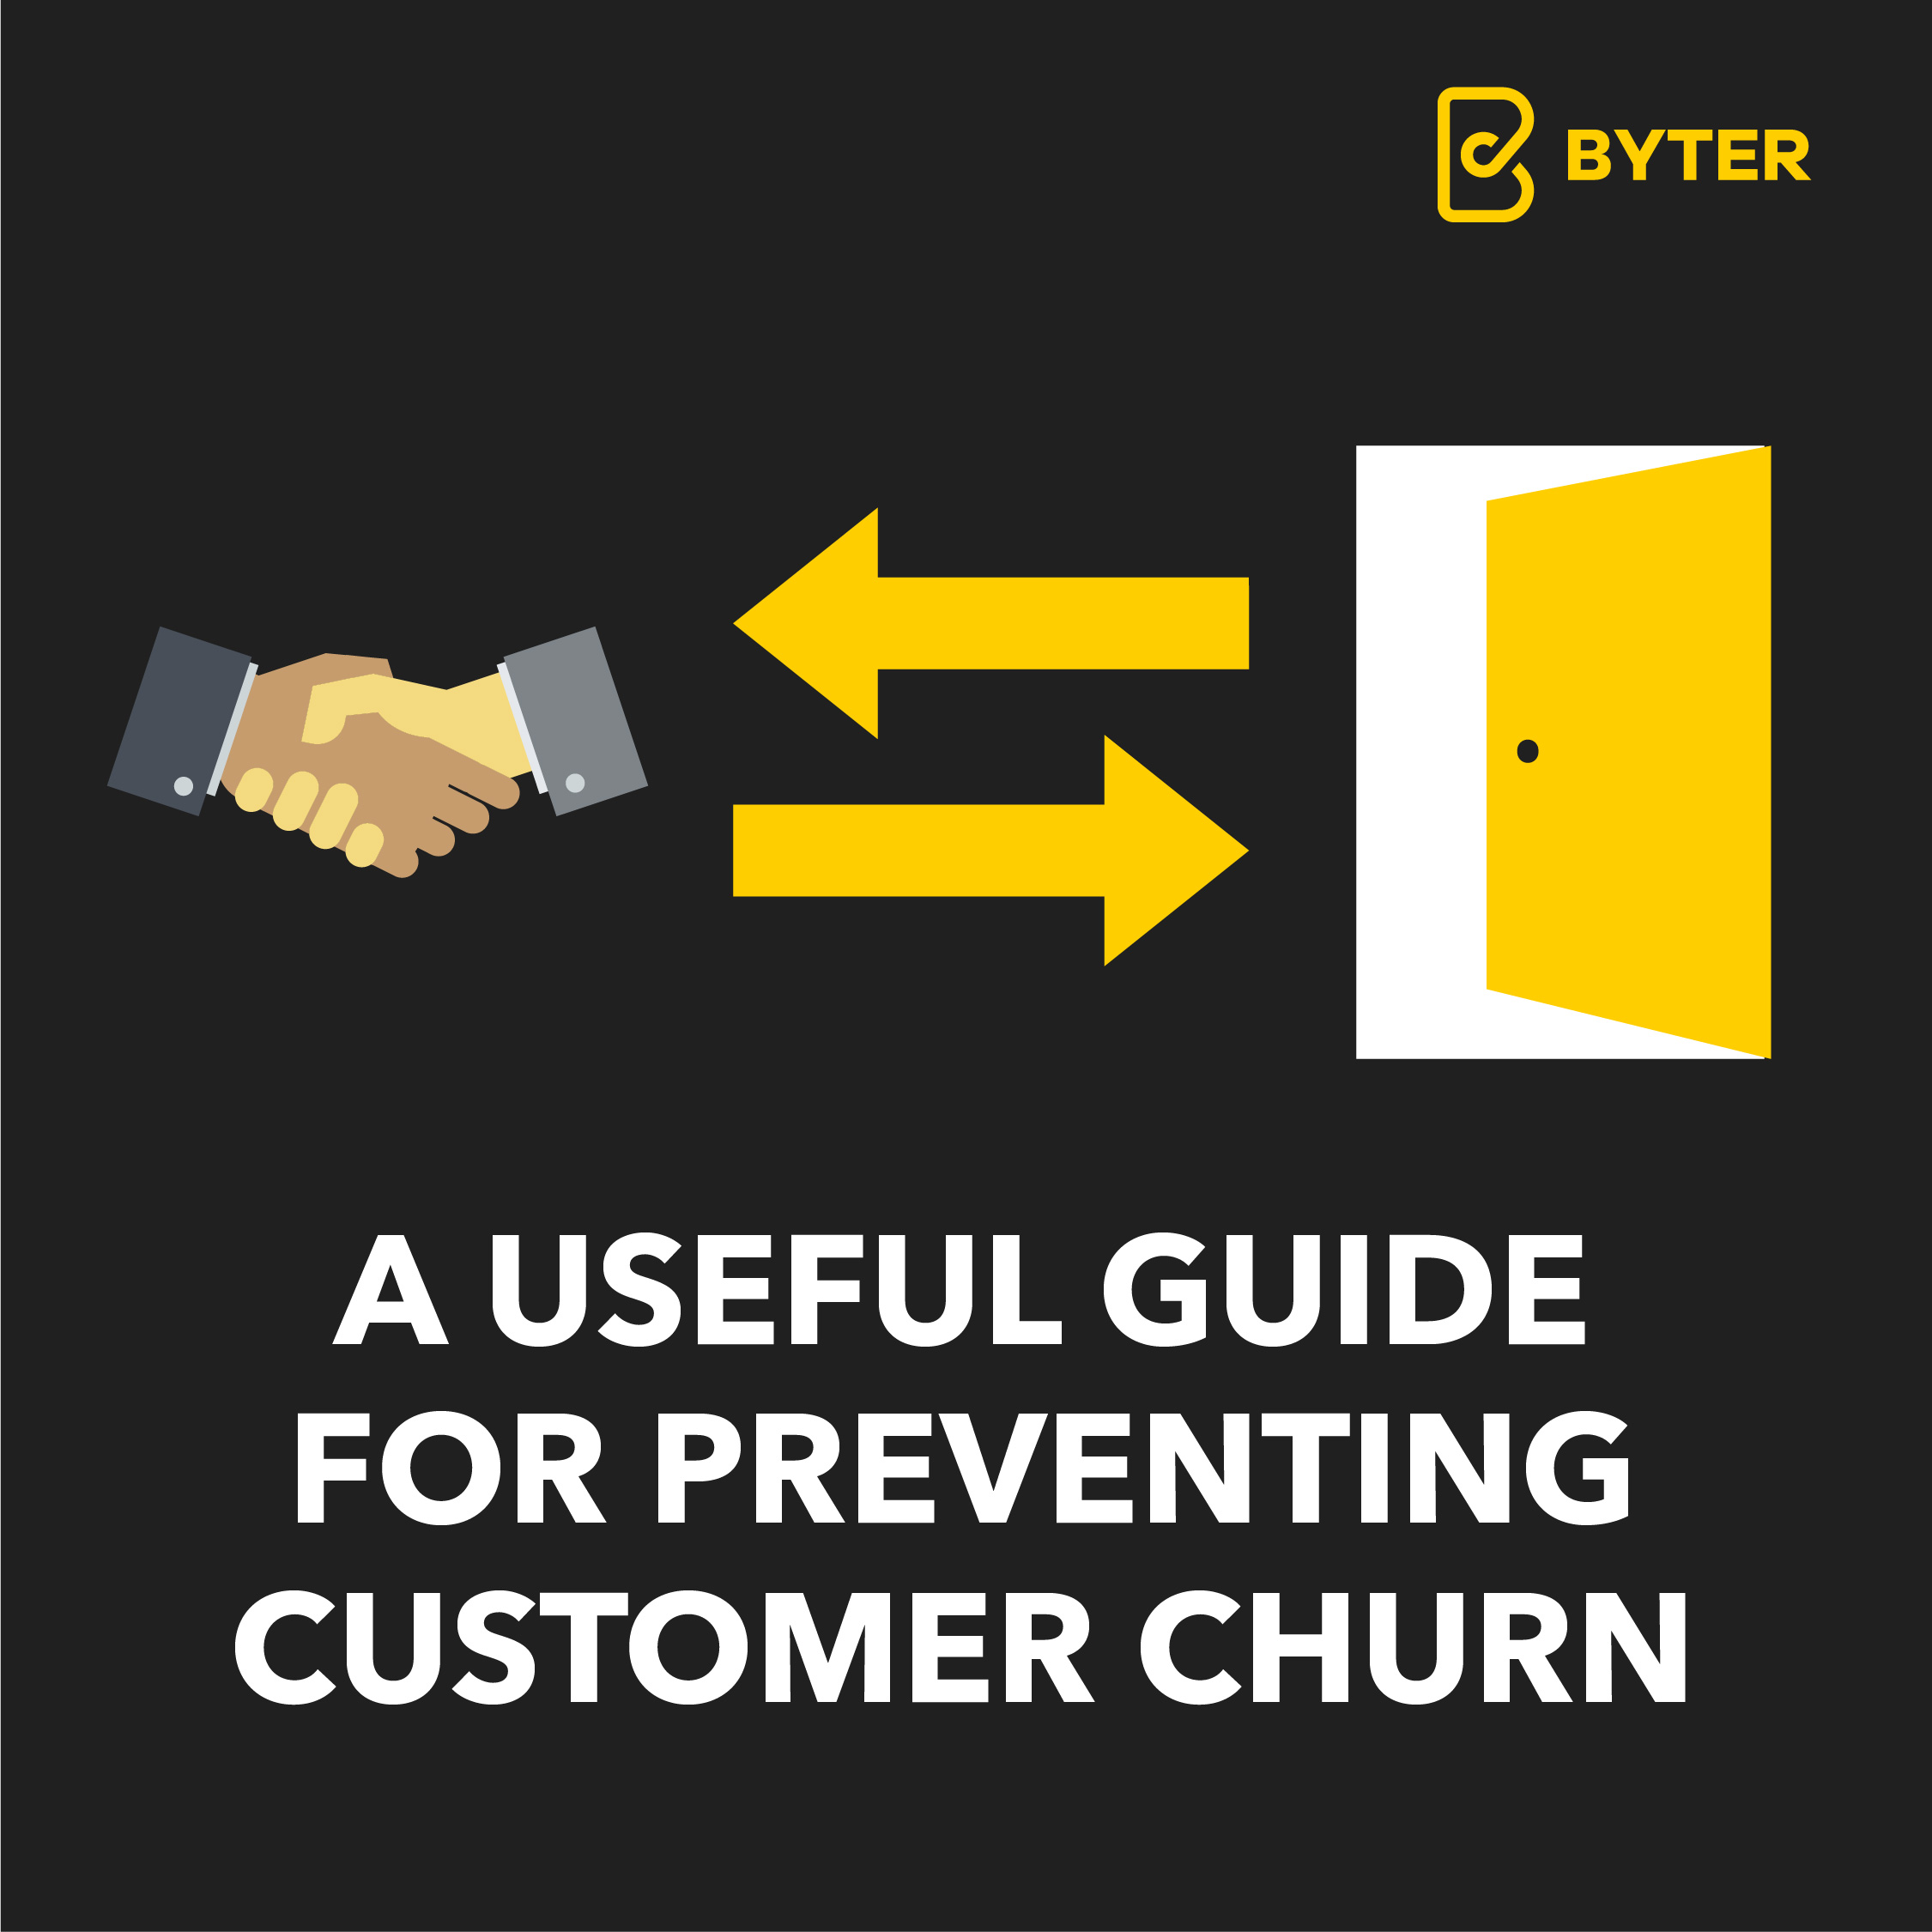 A Useful Guide for Preventing Customer Churn